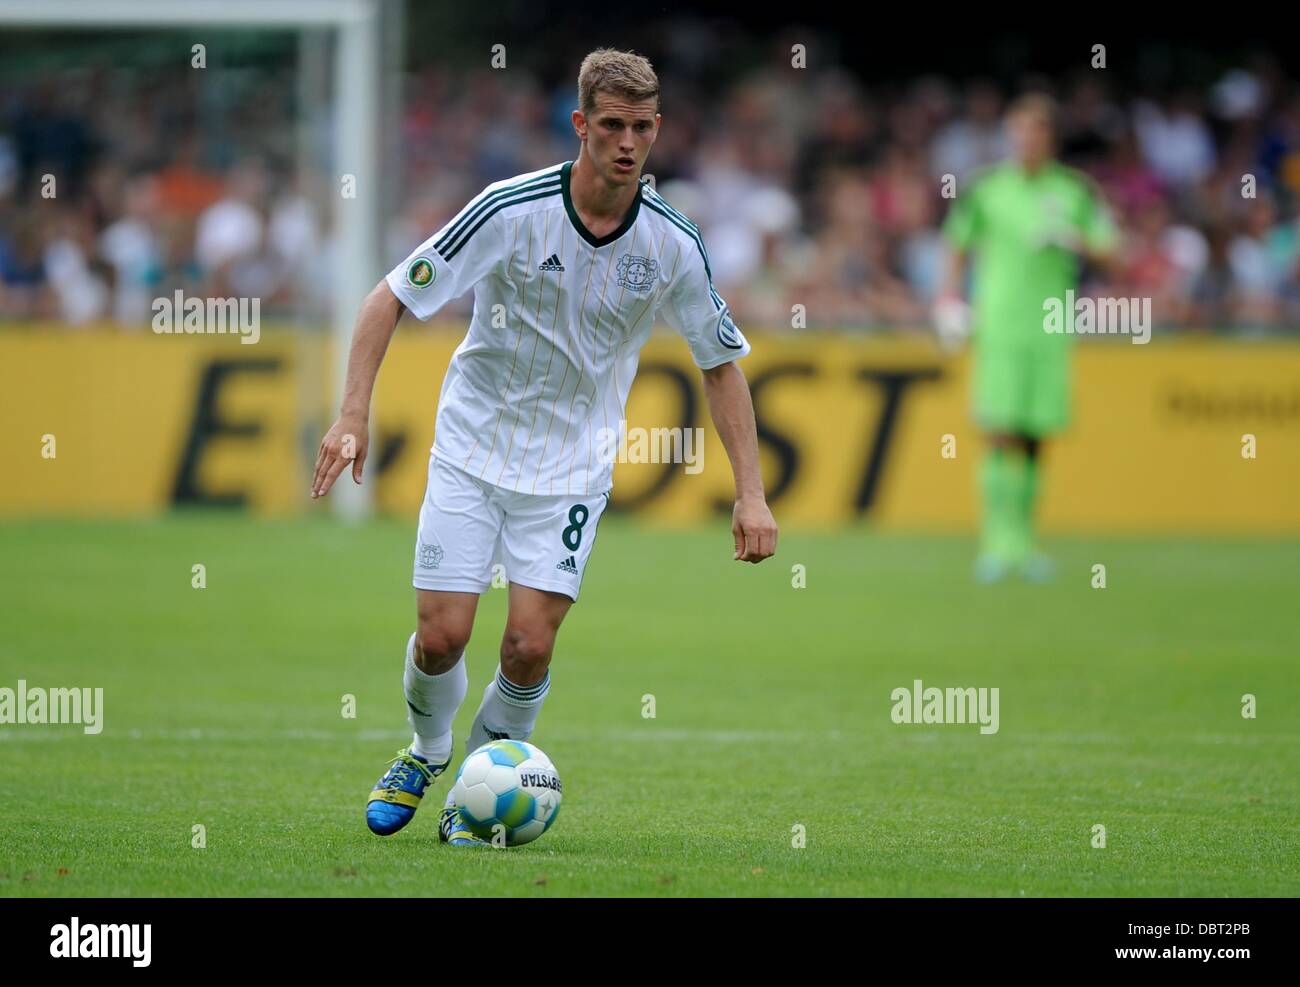 Lippstadt, Germany. 03rd Aug, 2013. Leverkusen's Lars Bender plays the ball during the first round DFB Cup match between SV Lippstadt 08 and Bayer Leverkusen at the Am Waldschloesschen stadium in Lippstadt, Germany, 03 August 2013. Photo: Jonas Guettler/dpa/Alamy Live News Stock Photo